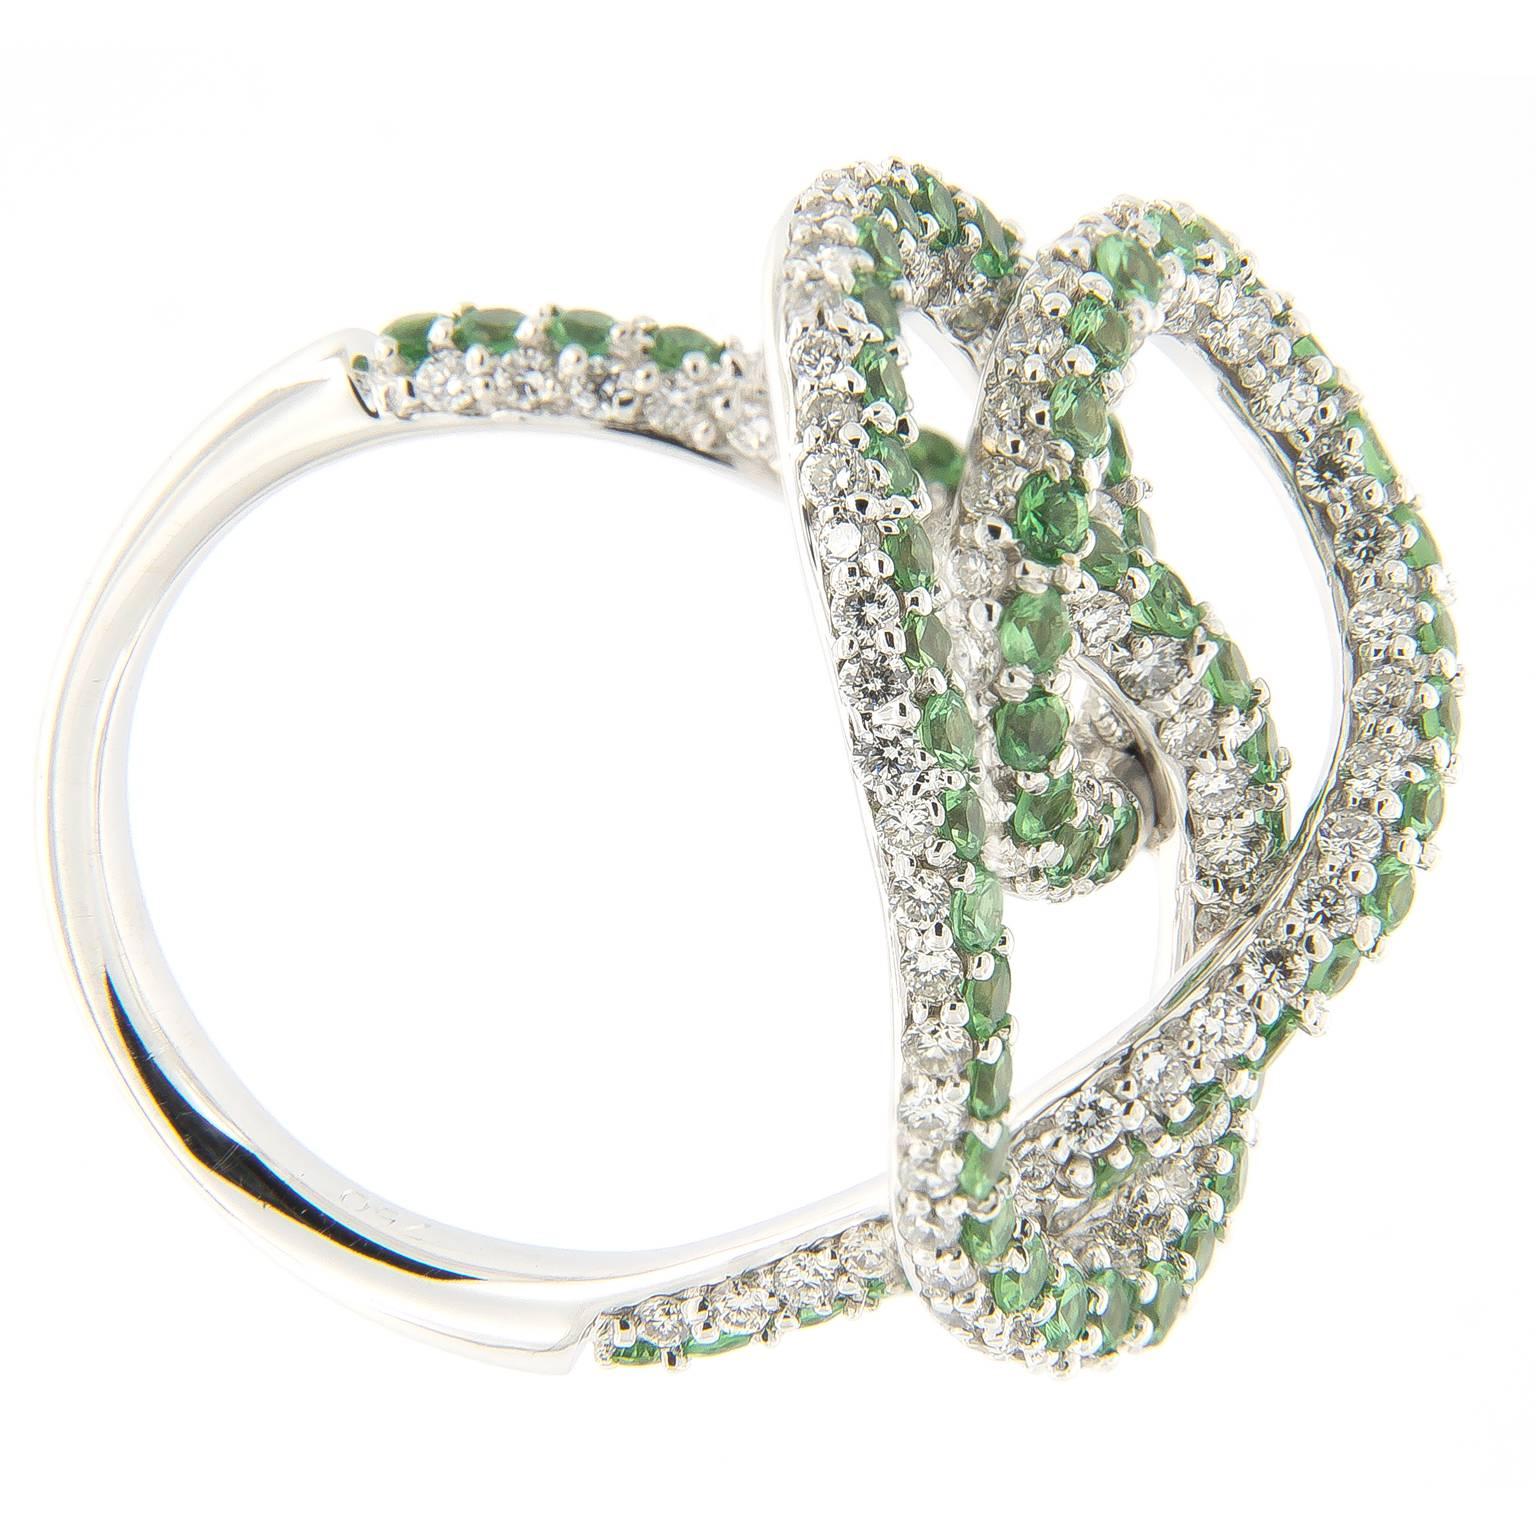 Whimsical 18k white gold large swirl knot ring from Hammerman of New York is compromised of 161 round diamonds and 69 savorites.
Ring Size 6.25

RBC Diamonds 1.49 cttw
Savorites 1.33 cttw